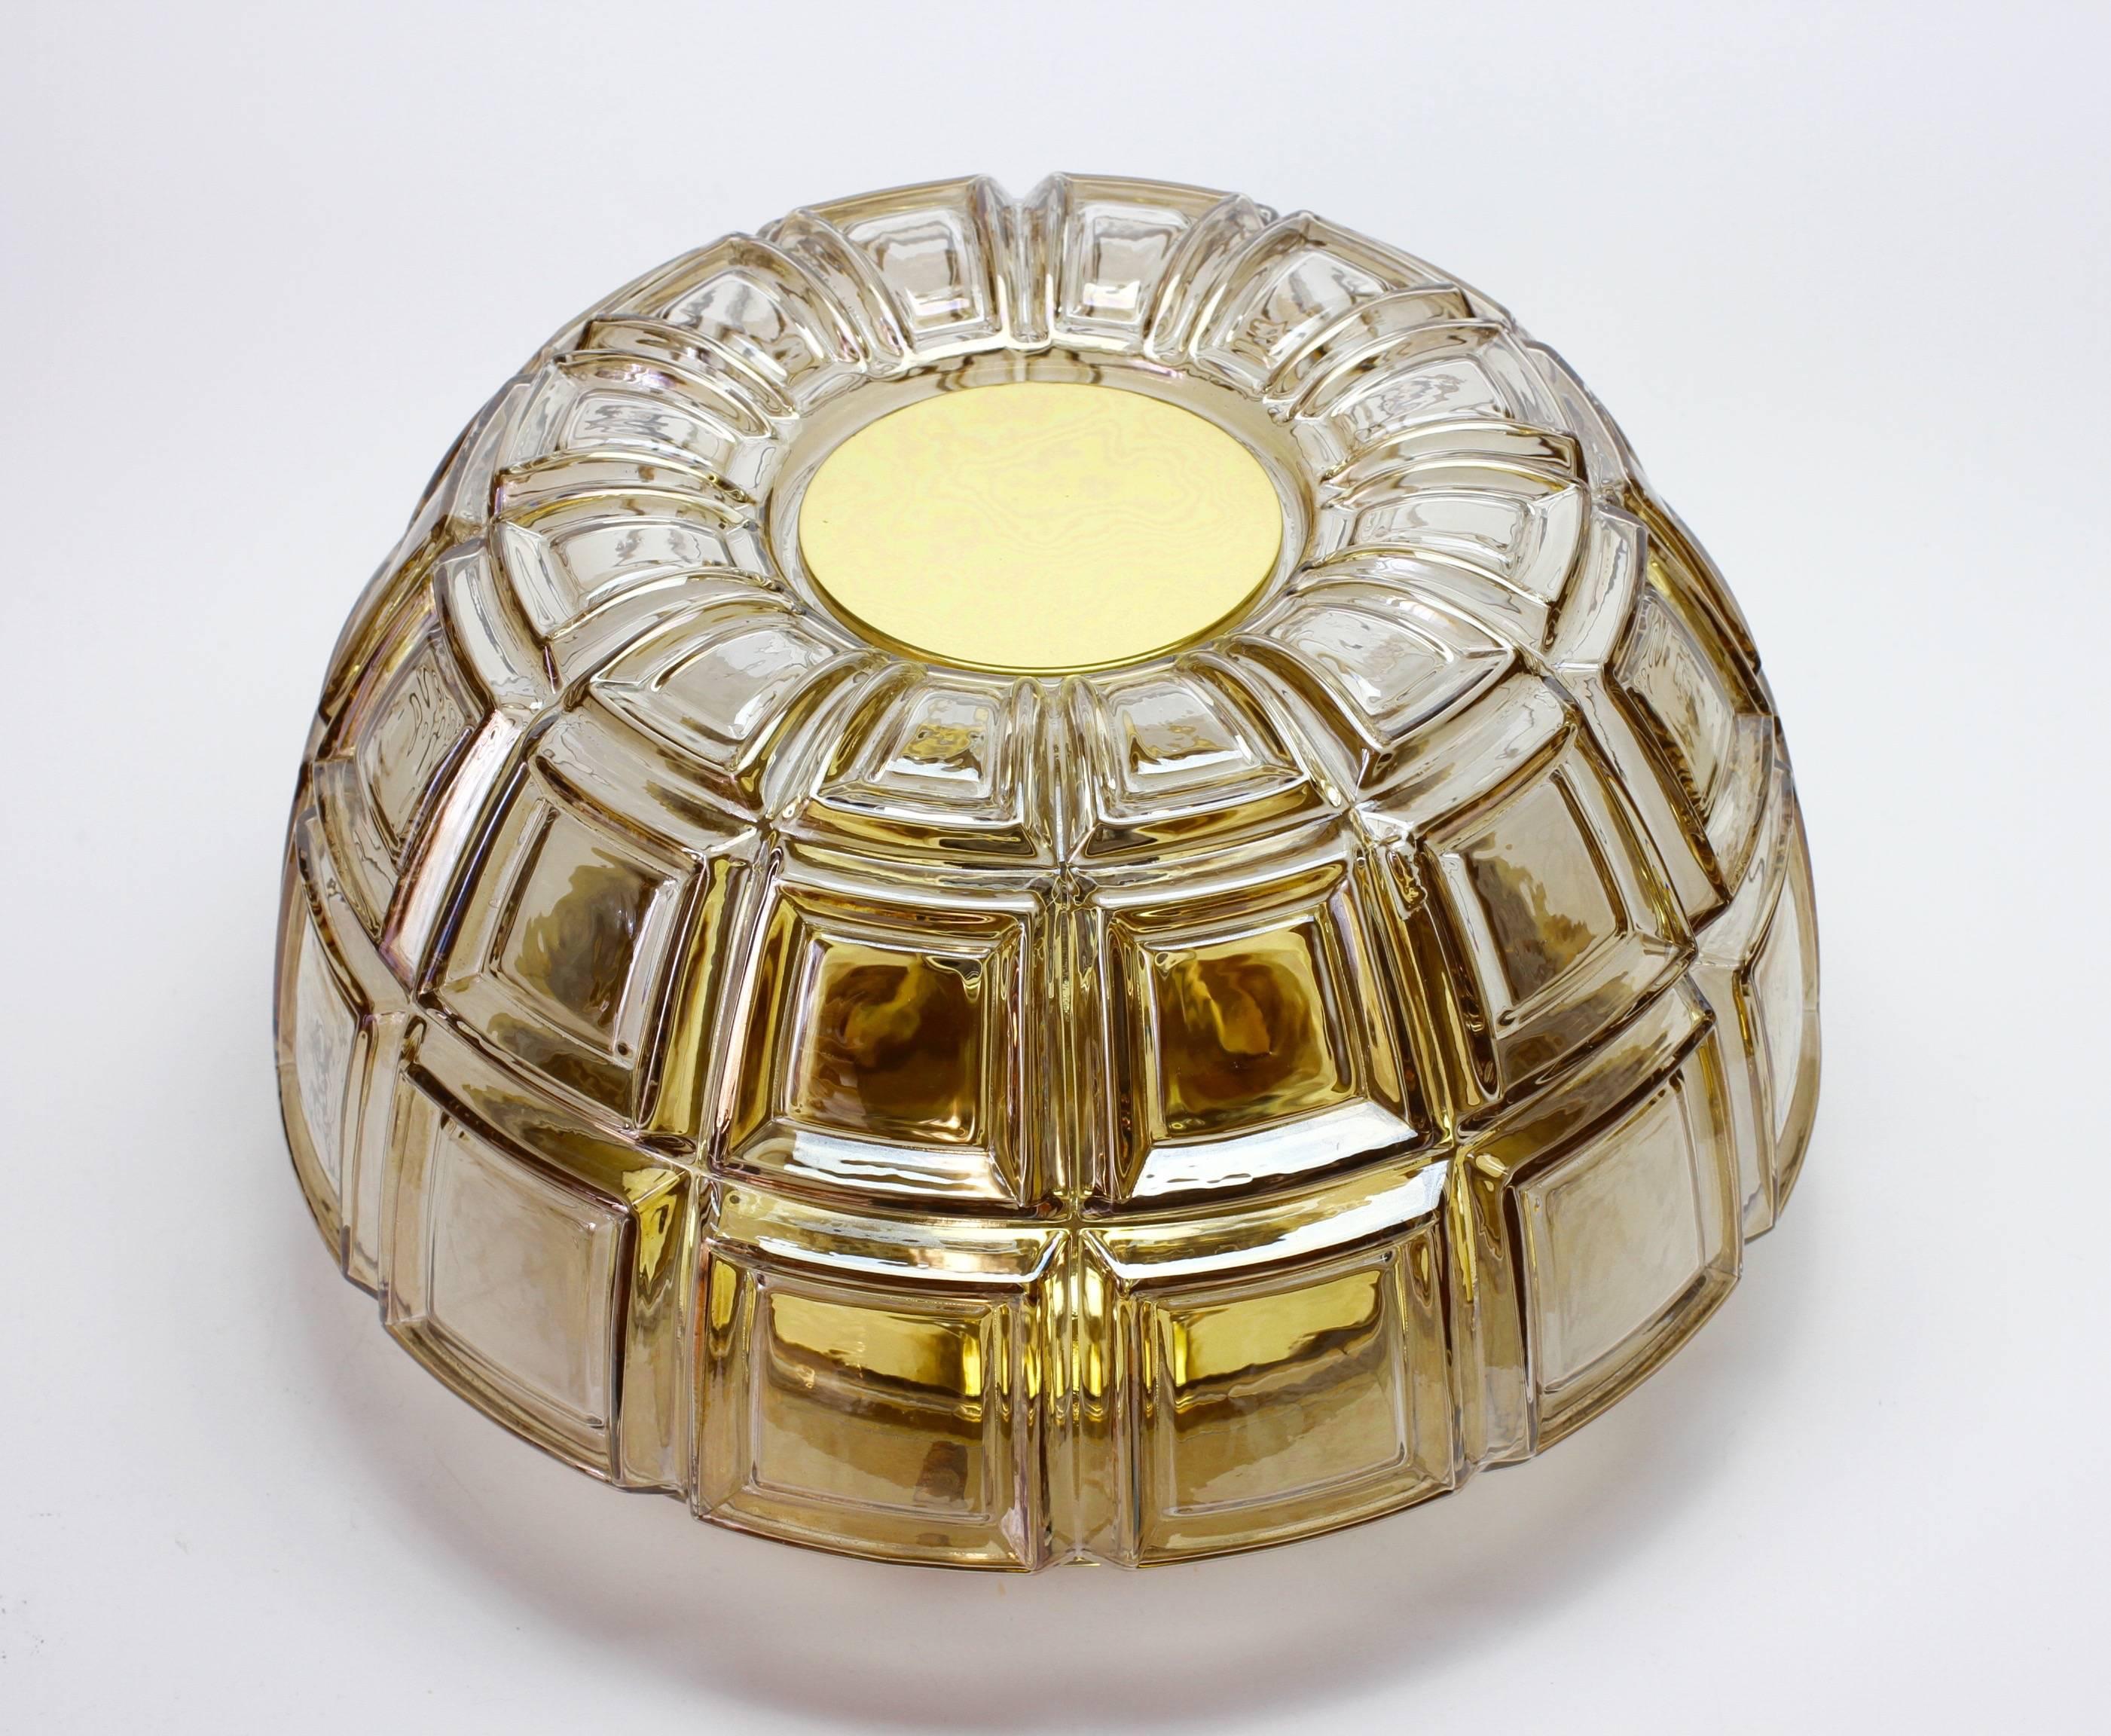 A stunning, vibrant and funky vintage pair wall lights or sconces by iconic German manufacturer Glashütte Limburg, circa 1975-1985. Featuring geometric shaped mouth blown Topaz toned textured glass elements with polished brass mounts. 

Each light